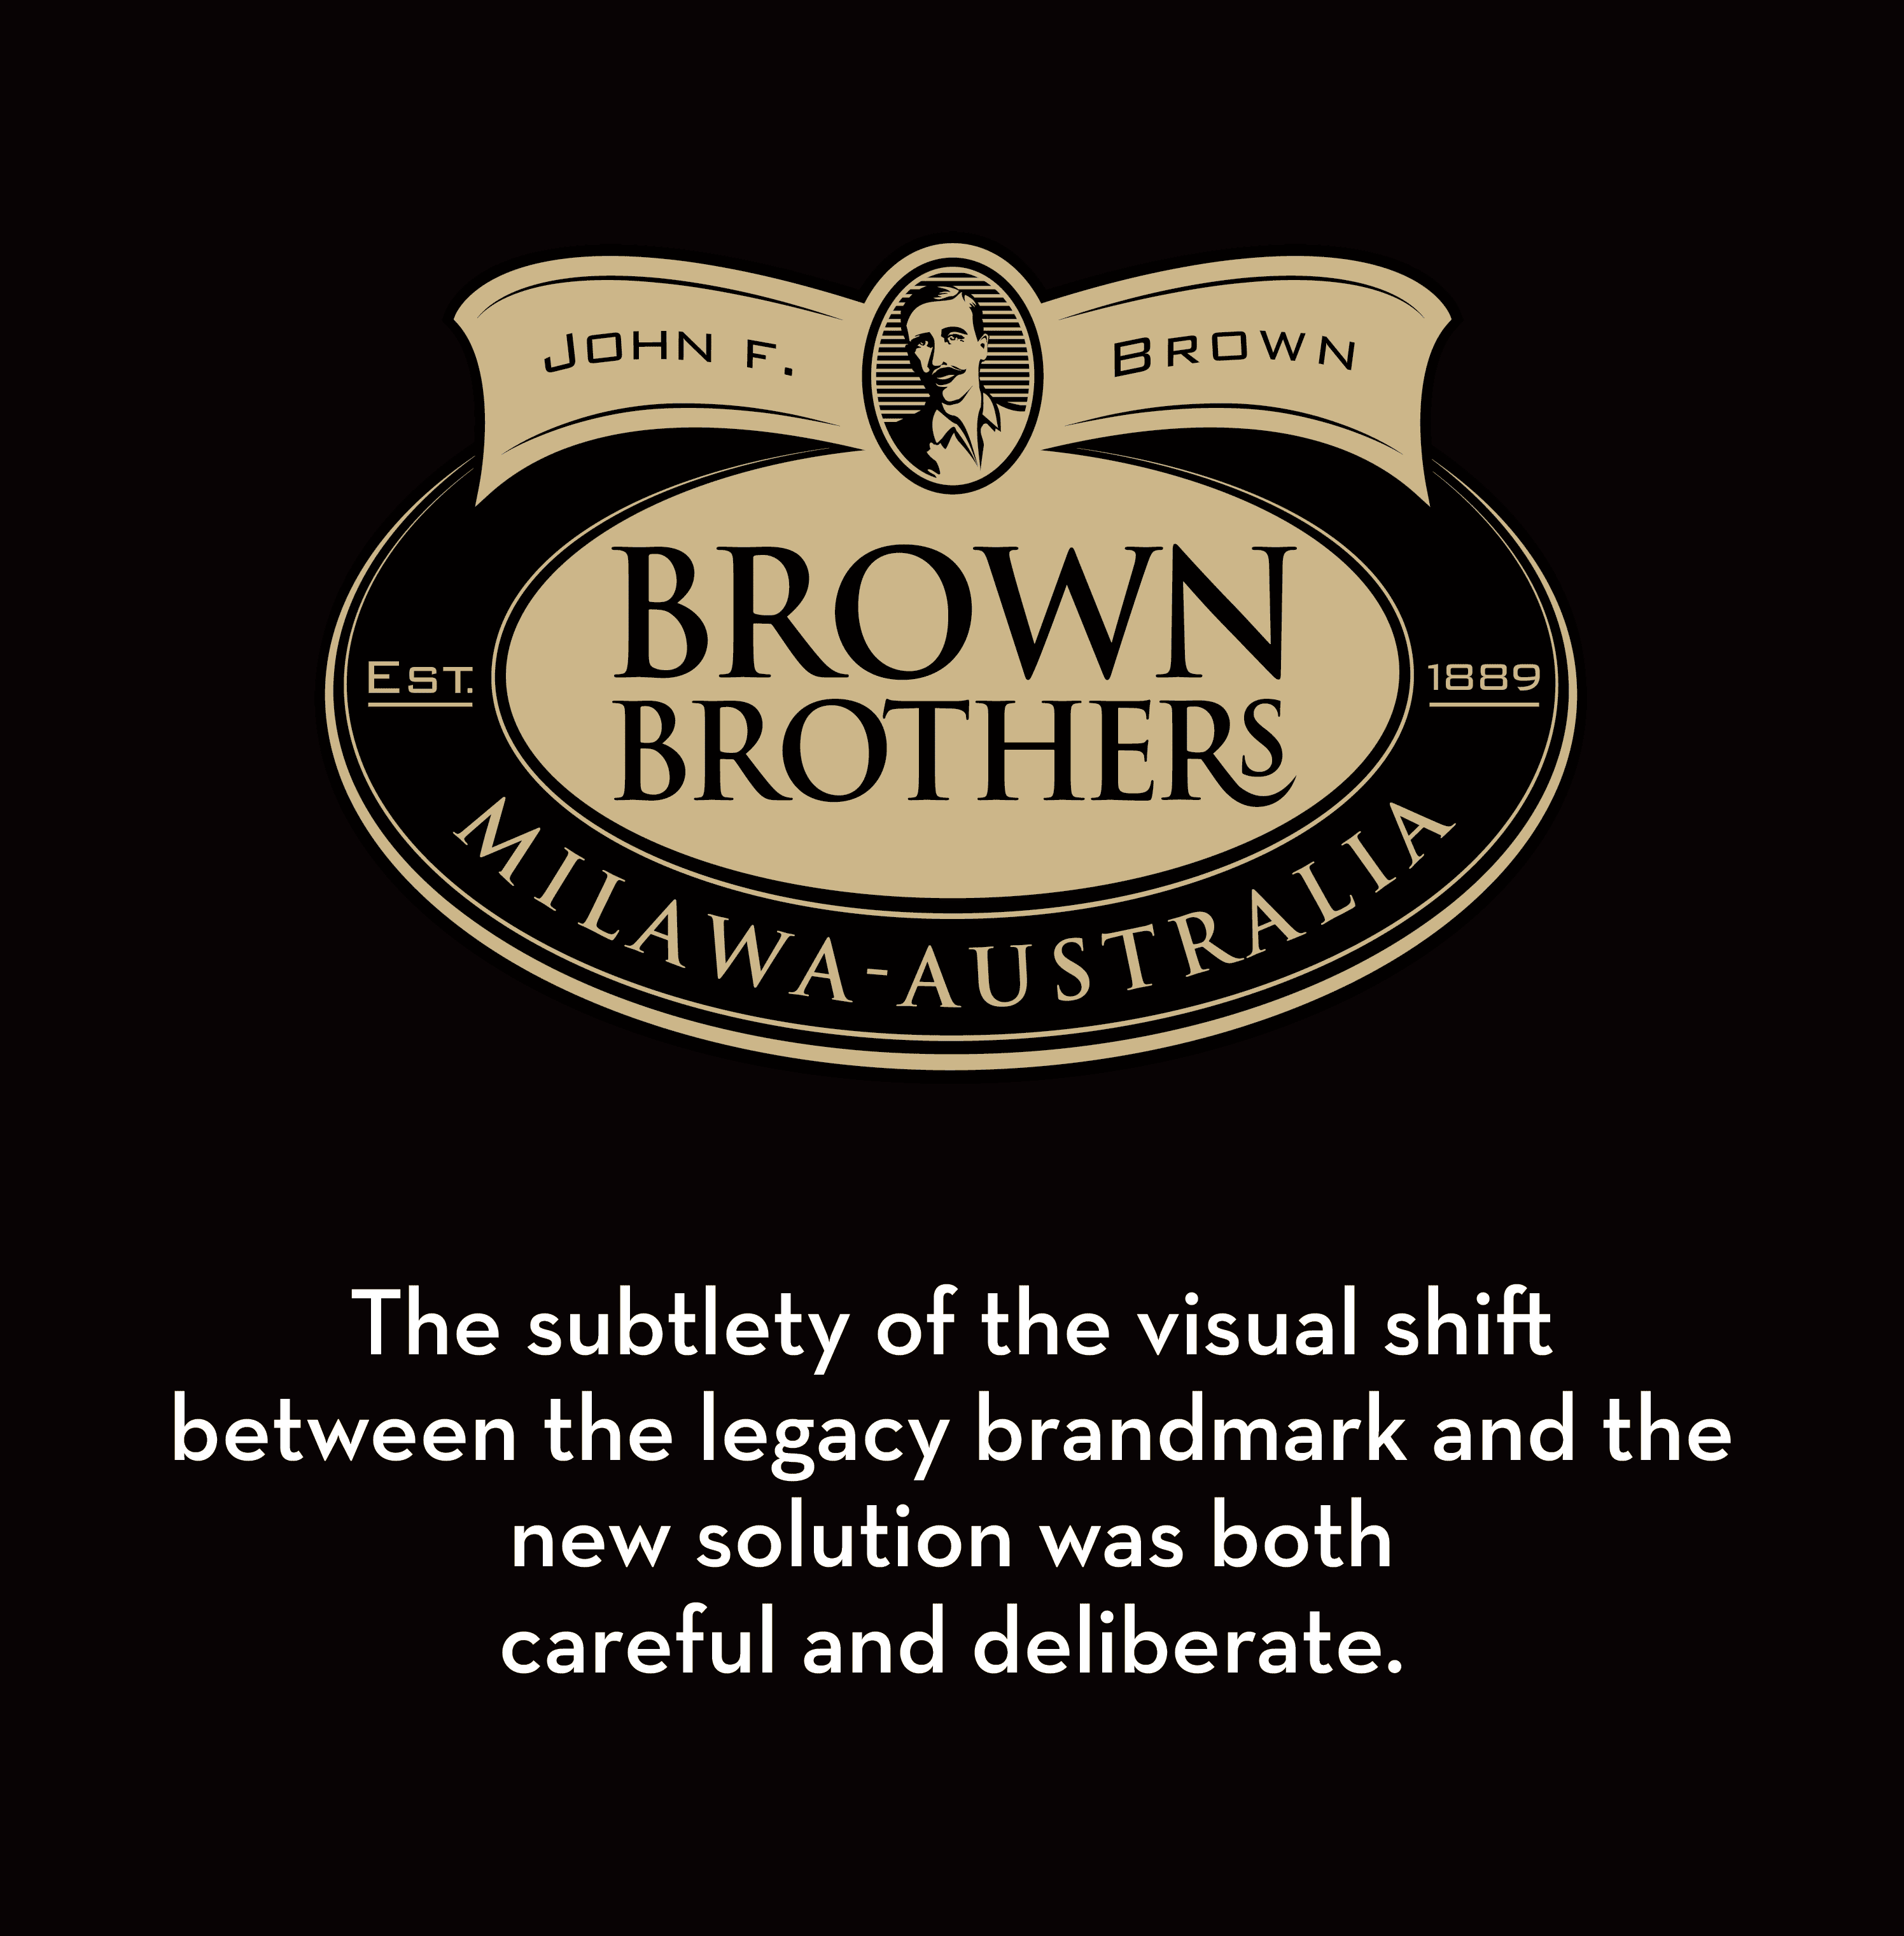 Brown brothers logo